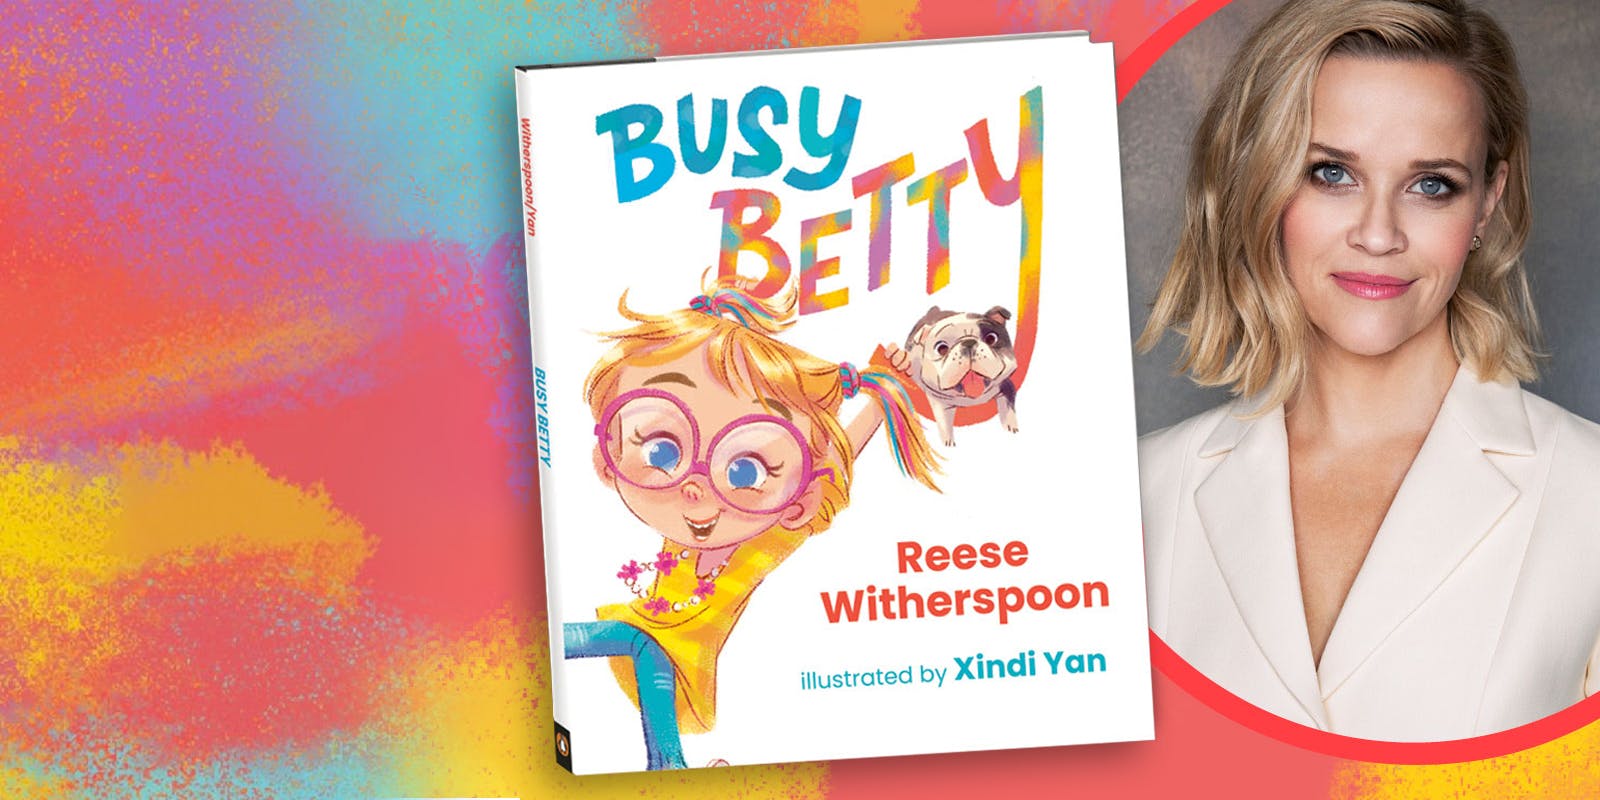 Reese Witherspoon's debut picture book announced